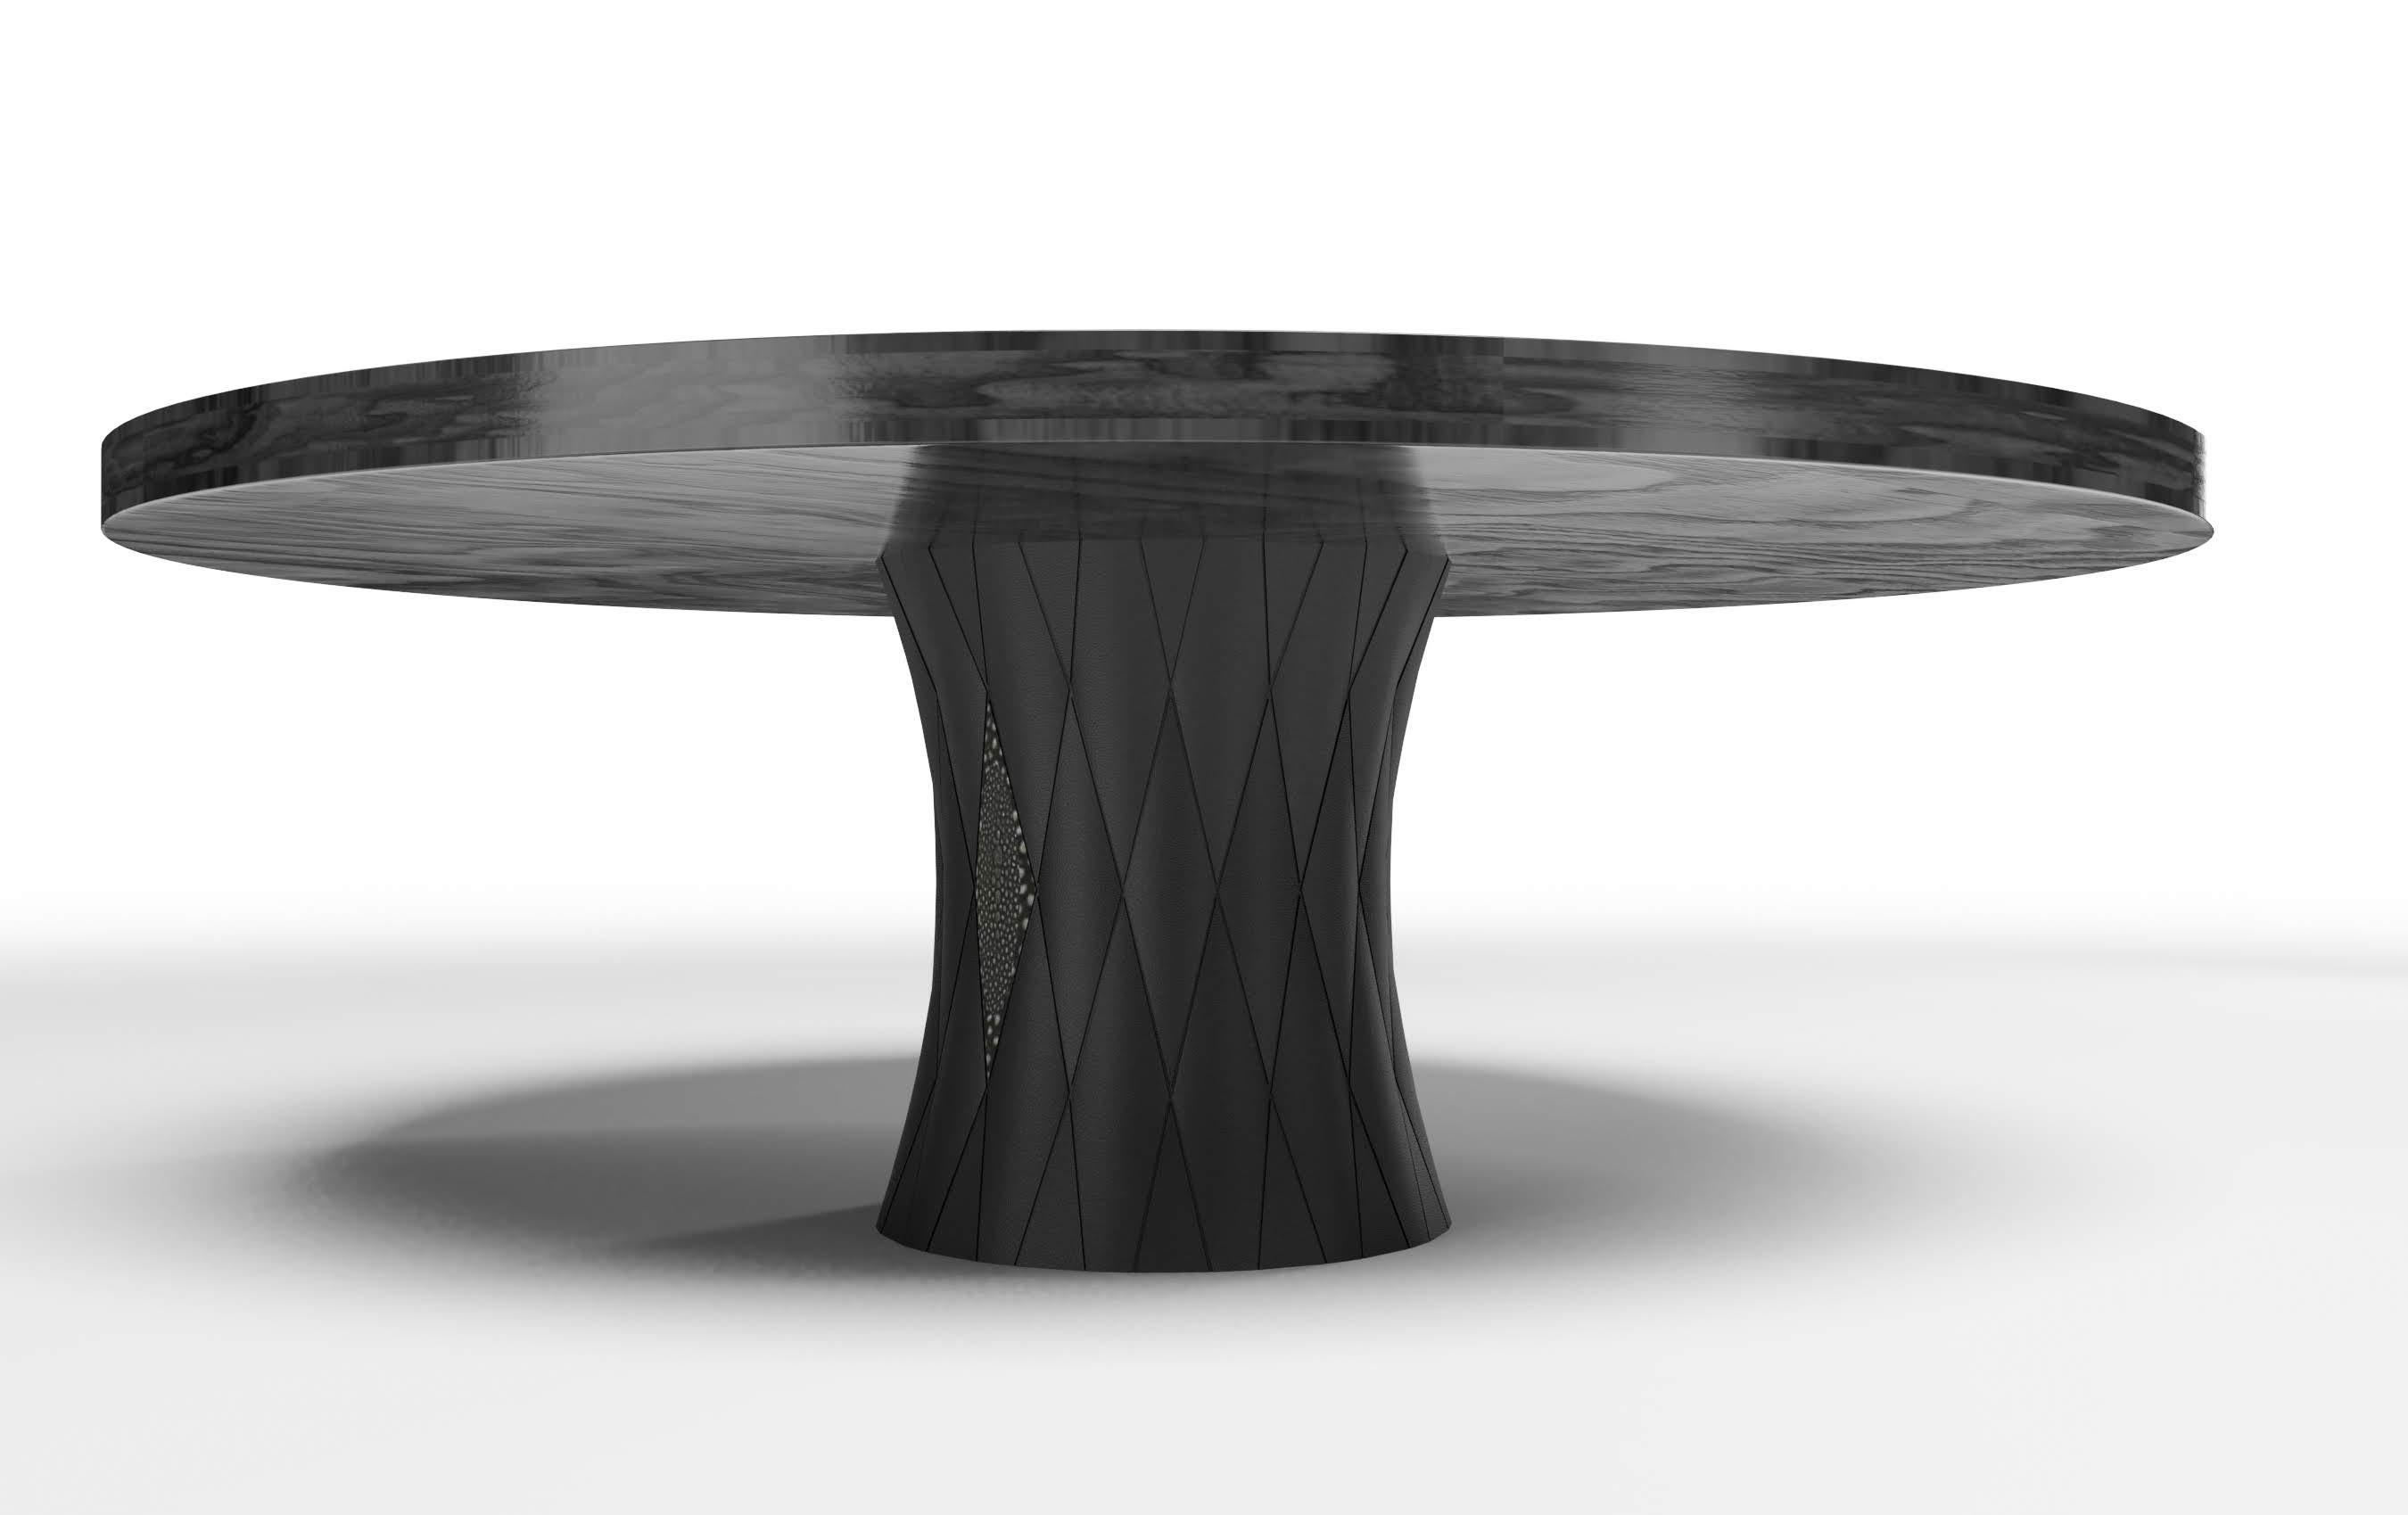 Italian CORONADO ROUND DINING TABLE - Modern Maple Frise Charcoal Top and Leather Base